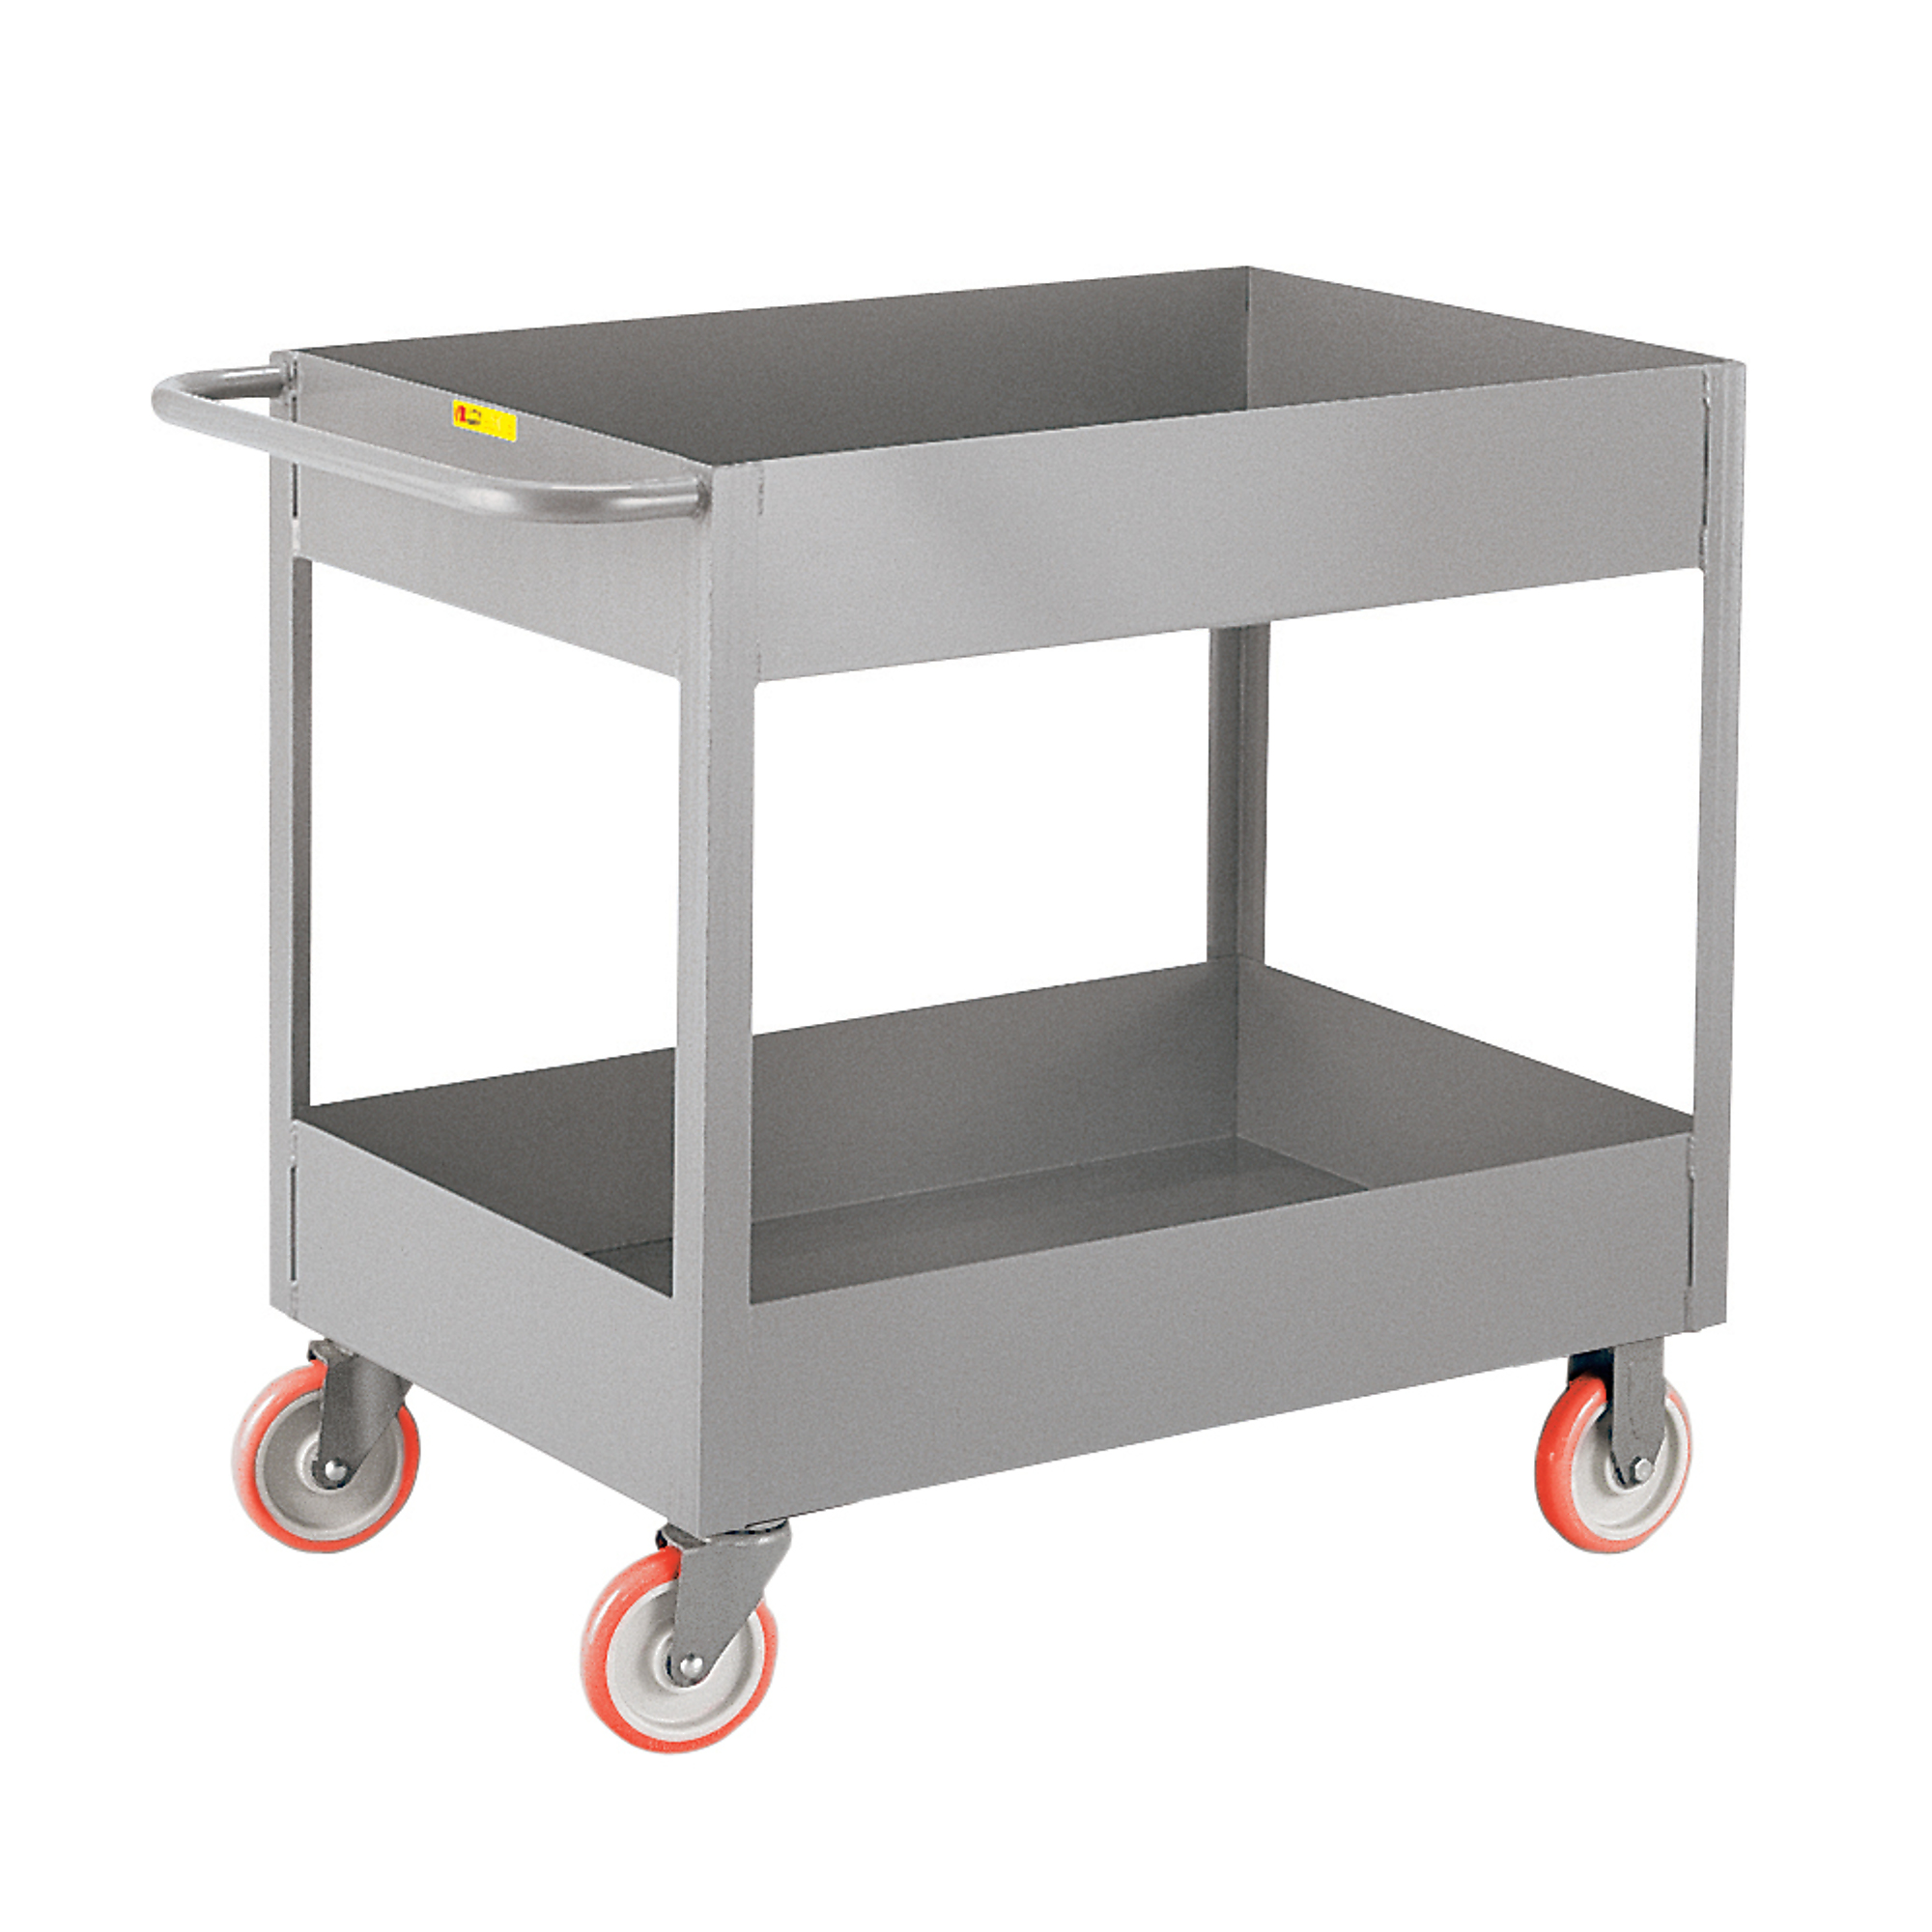 Little Giant, 6Inch Deep Shelf Truck, 24x36, 1200 lbs, Total Capacity 1200 lb, Shelves (qty.) 2, Material Carbon Steel, Model DS2436X6-5PY